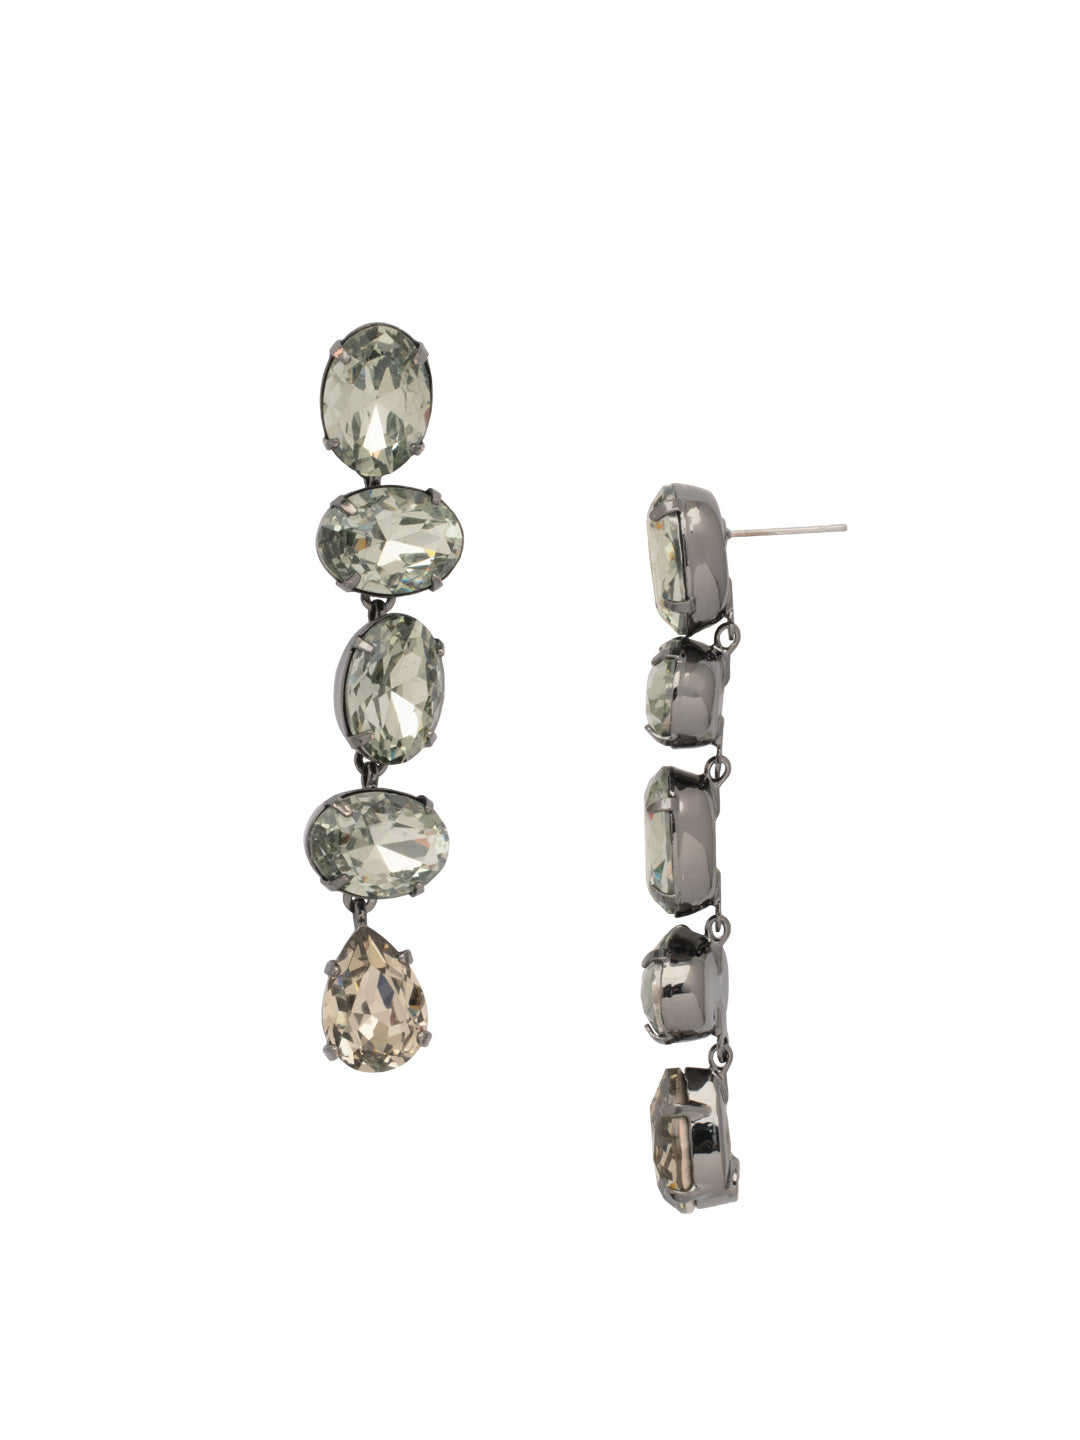 Michelle Statement Earrings - EFL10GMBD - <p>The Michelle Statement Earrings feature alternating oval and pear-cut crystals dangling from a post. From Sorrelli's Black Diamond collection in our Gun Metal finish.</p>